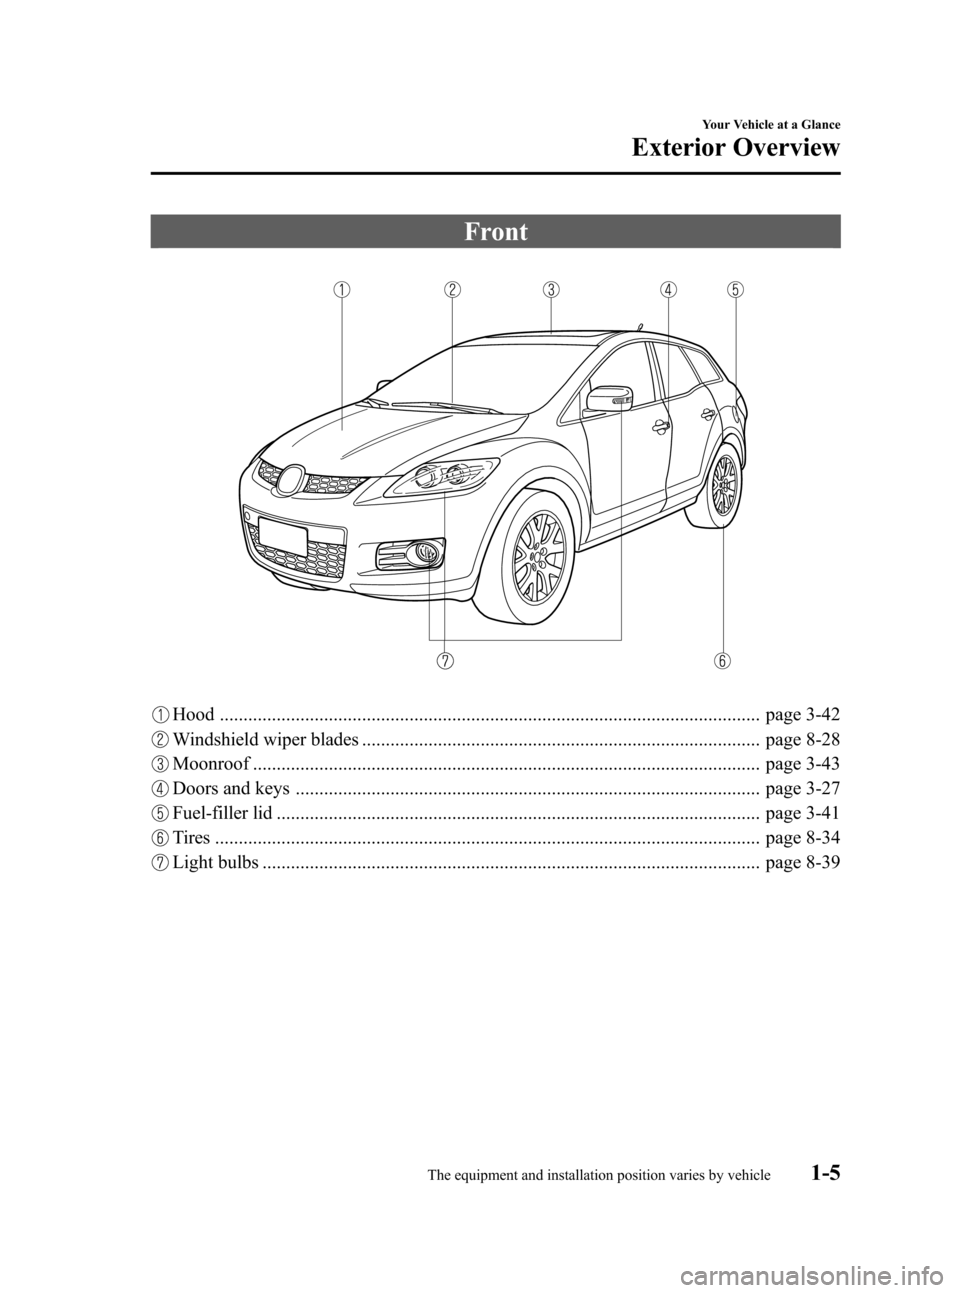 MAZDA MODEL CX-7 2009  Owners Manual (in English) Black plate (11,1)
Front
Hood .................................................................................................................. page 3-42
Windshield wiper blades .....................